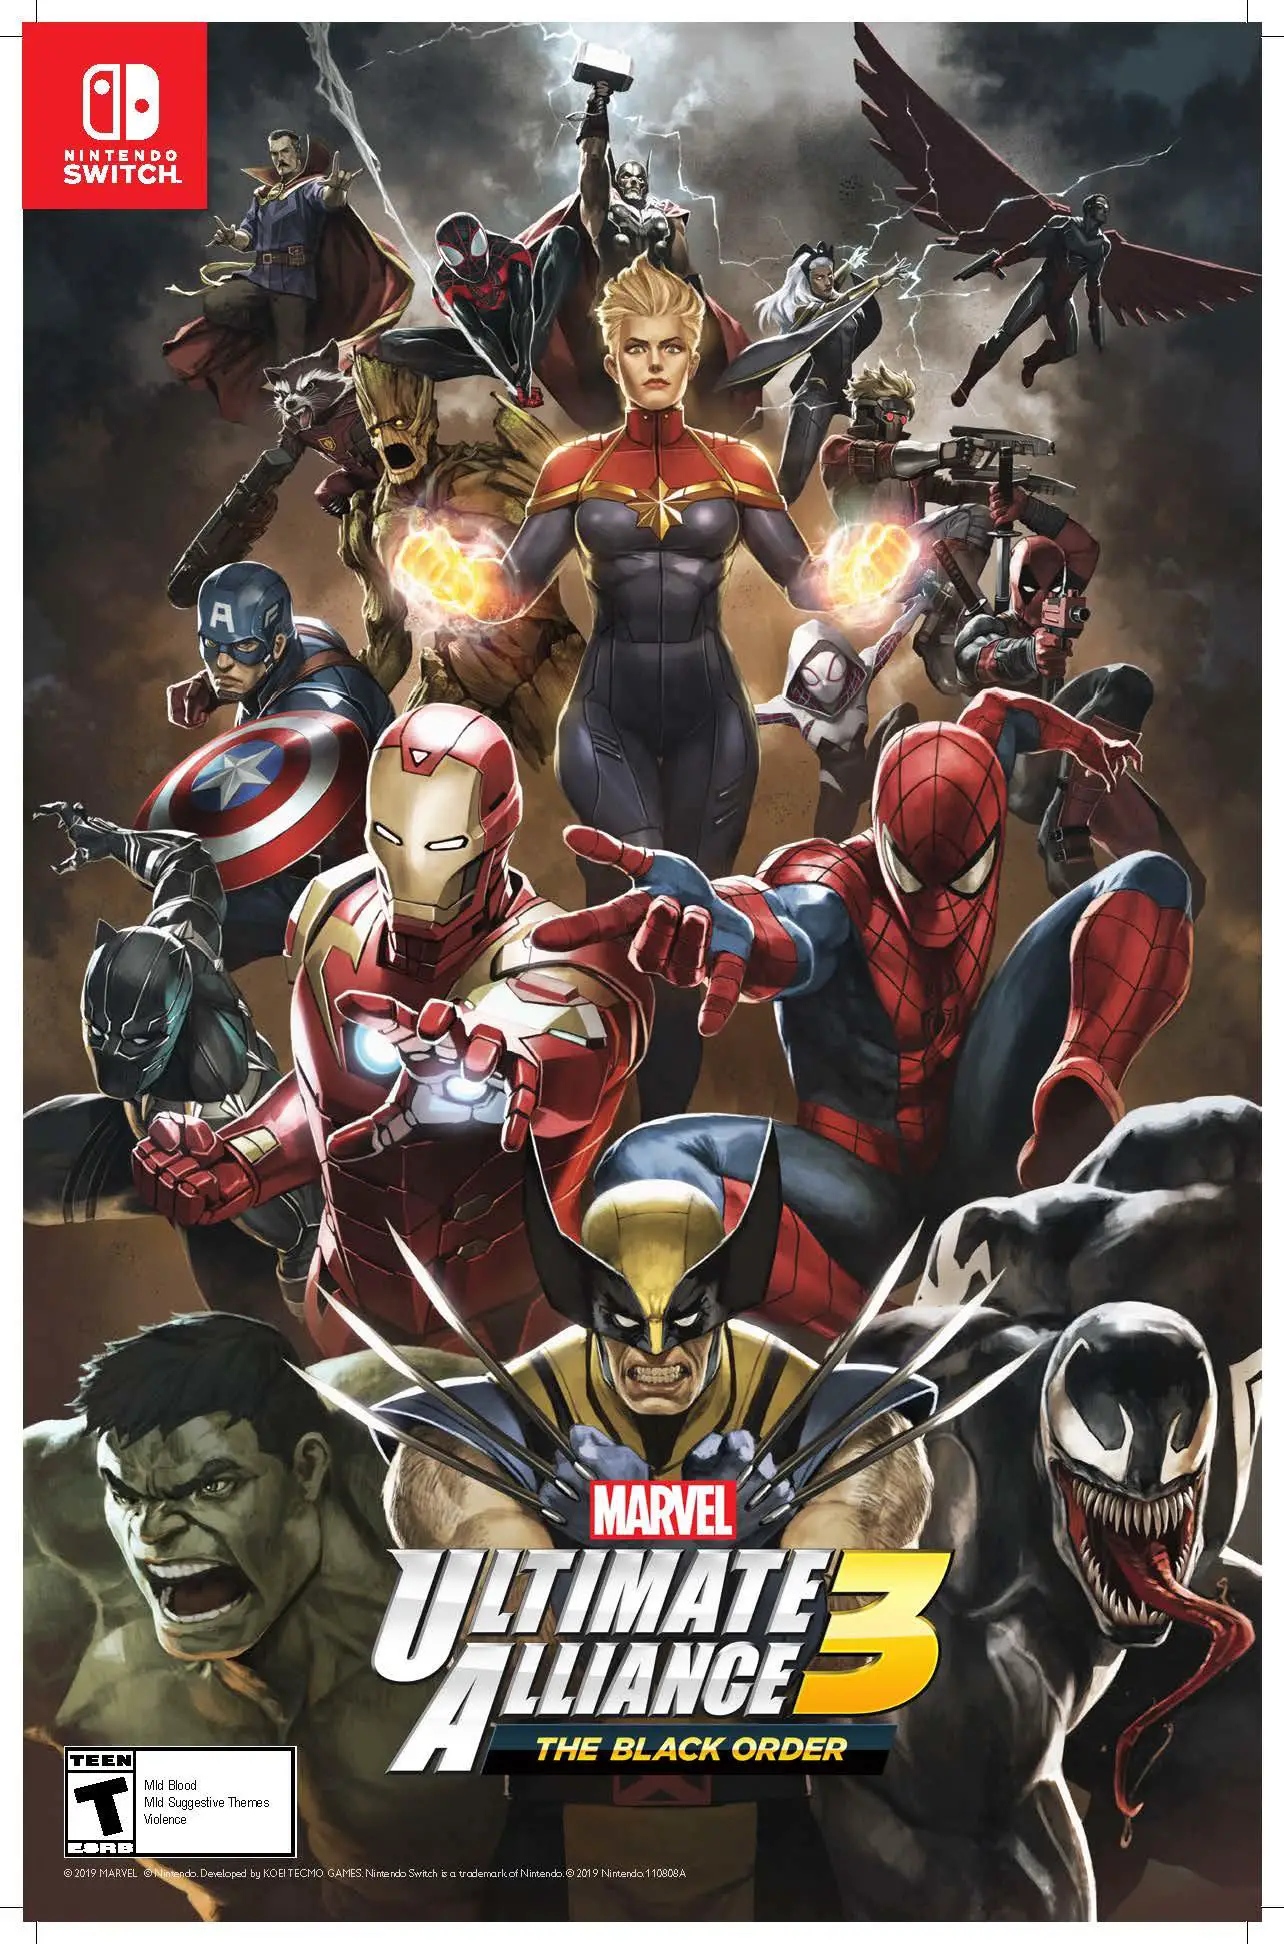 Marvel Ultimate Alliance 3 The Black Order Game Preorders